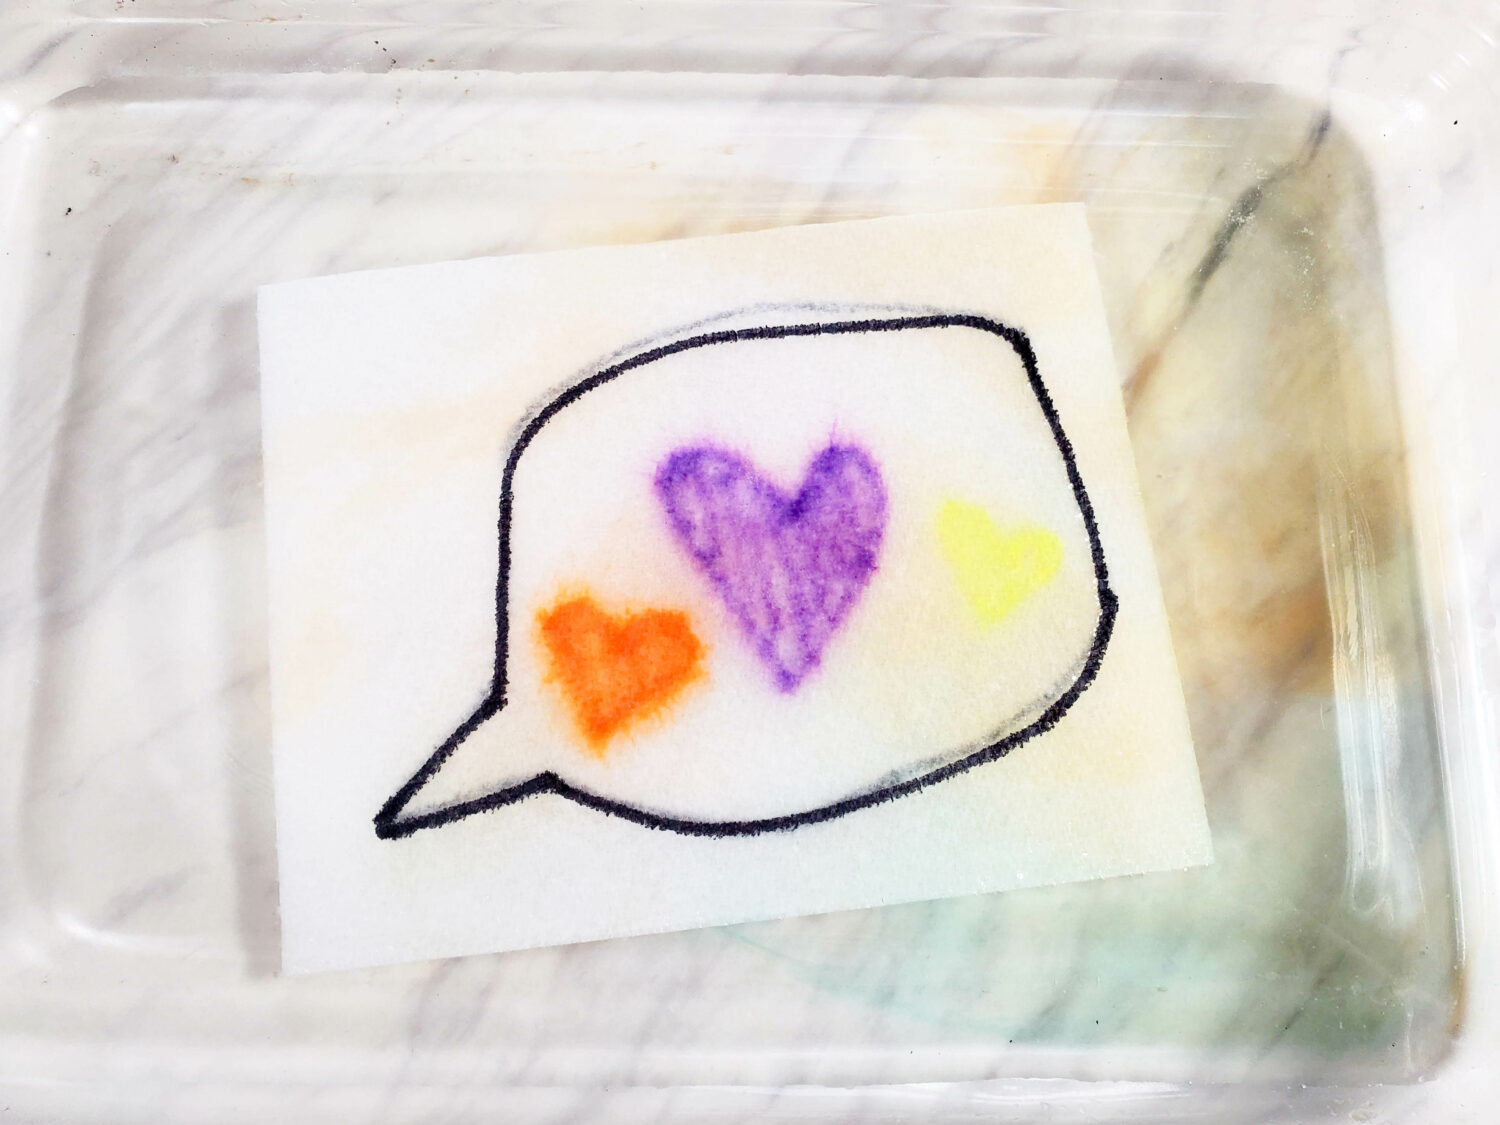 Magic Paper Towel Art song review game for Singing Time with any songs you'd like magically add colors with water. Ready with Valentine's Day song ideas or add your own songs! Printable helps for LDS Primary music leaders.